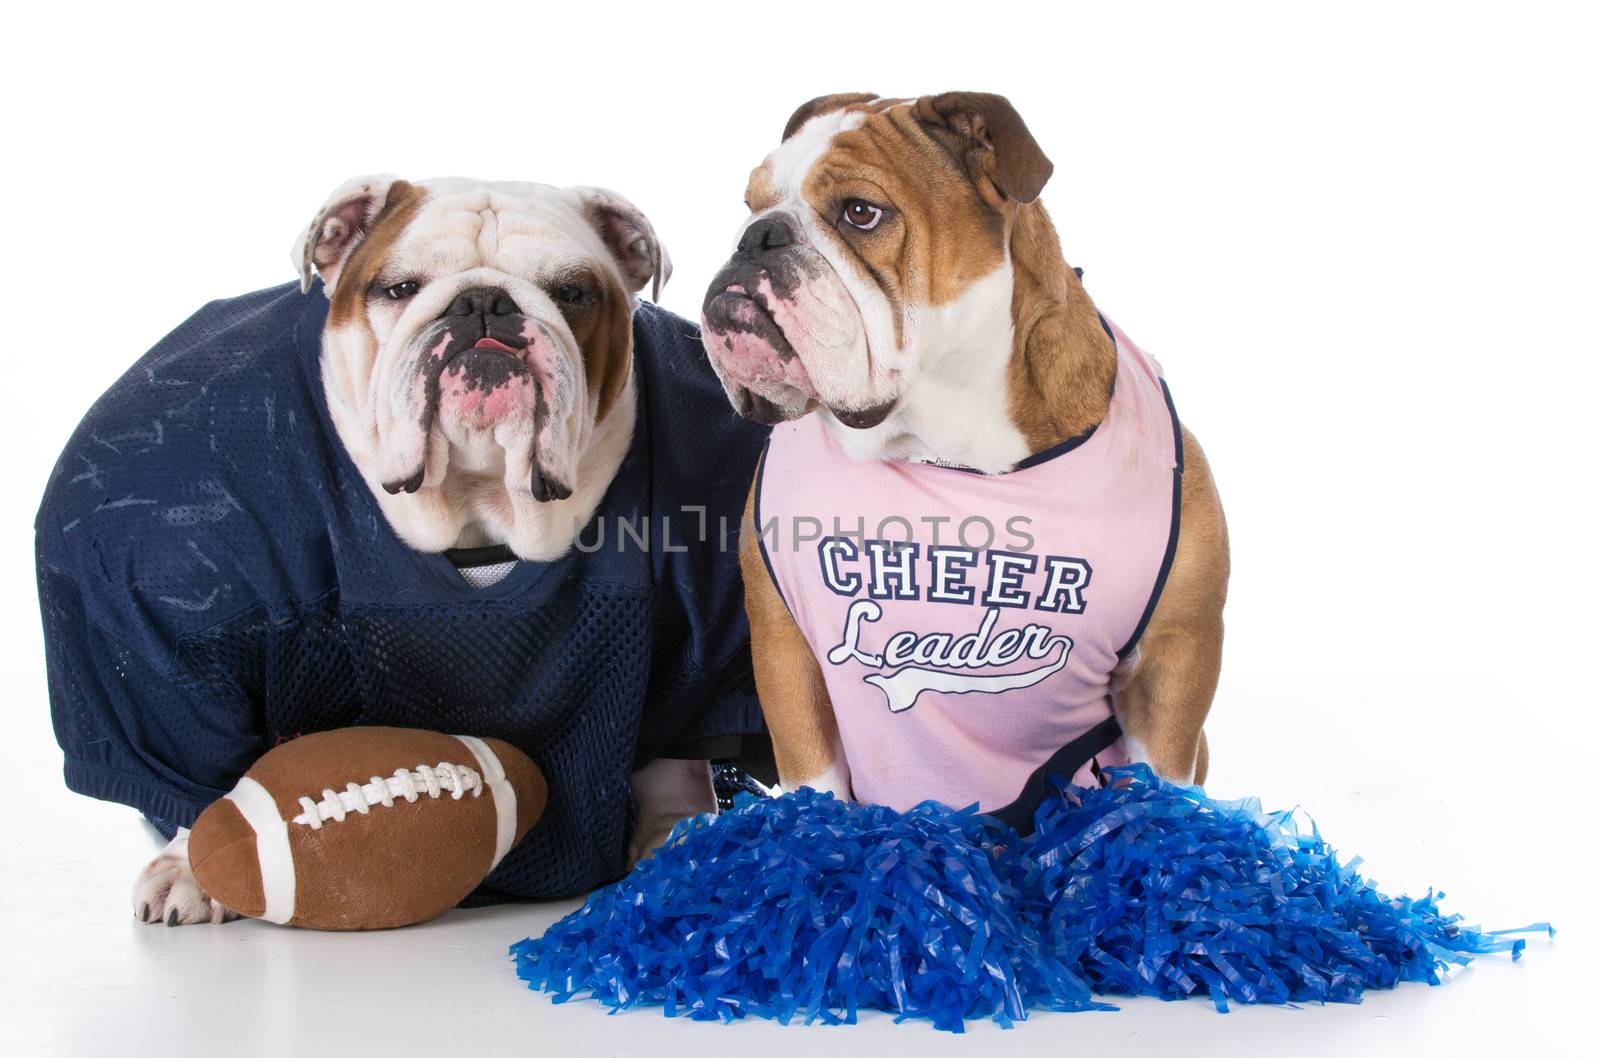 football player and cheerleader  by willeecole123